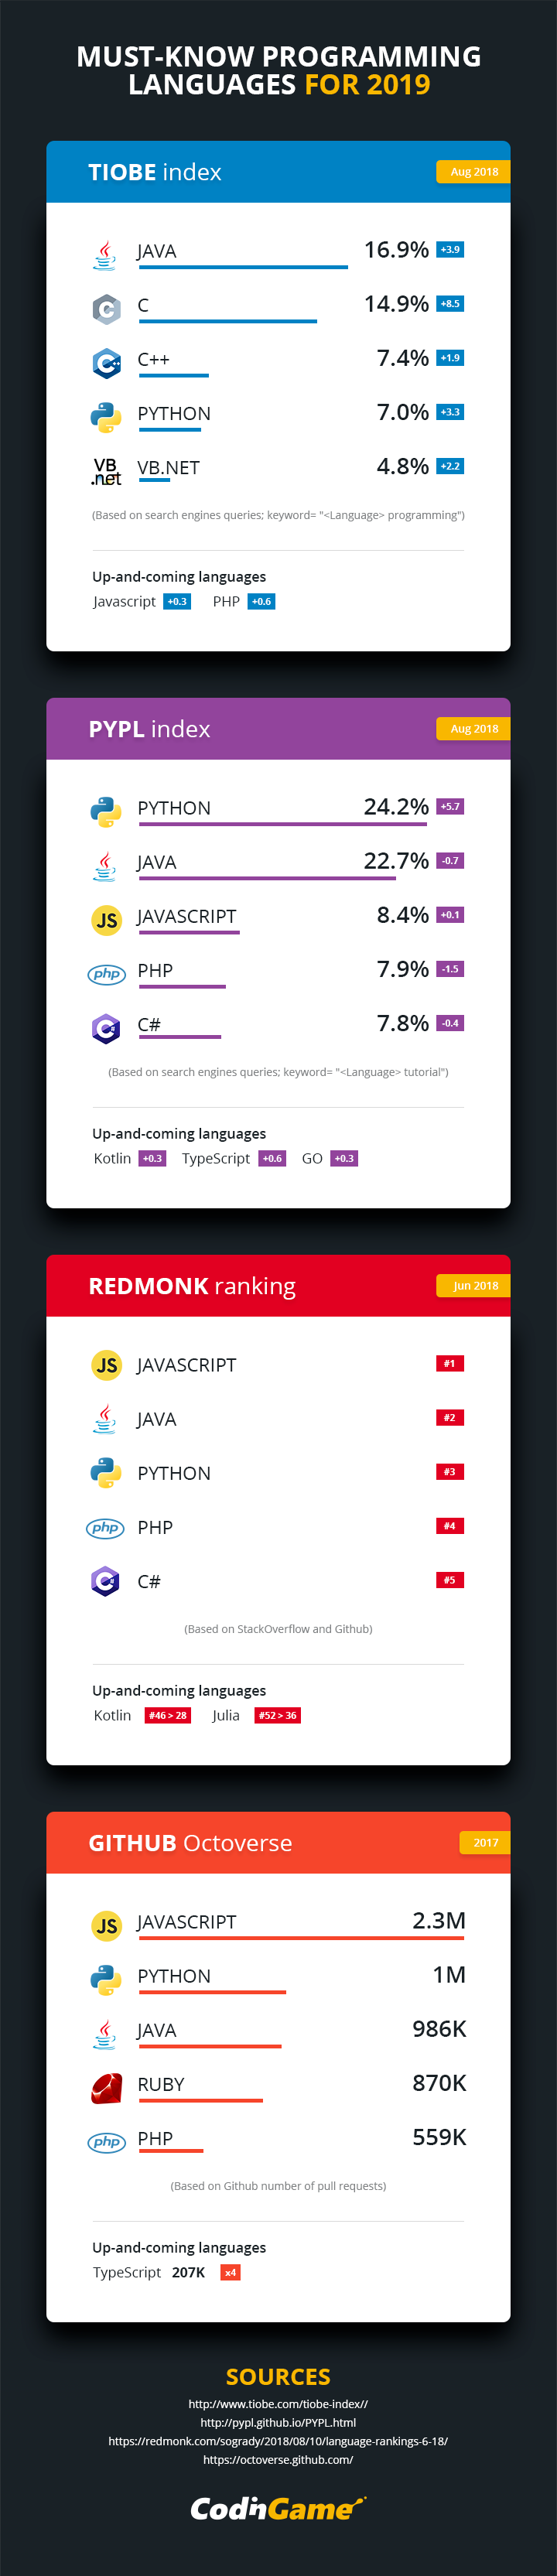 Top Programming Languages to Learn in 2019